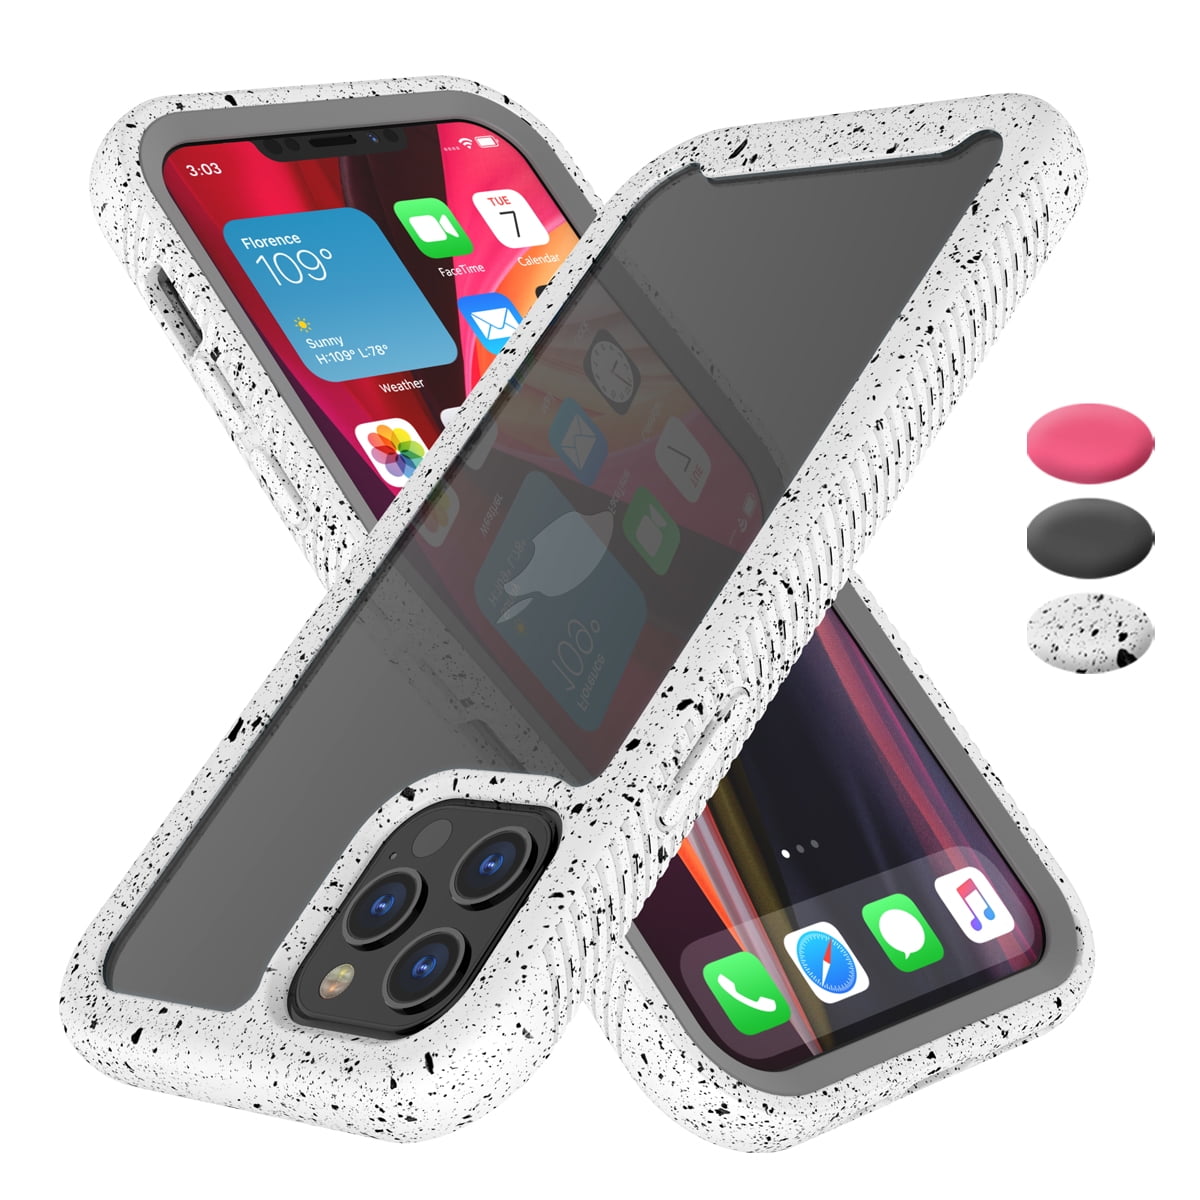 Apple iPhone 12 Pro Max Case, 2020 Takfox Shock Absorbing Rugged Shockproof Crystal Clear Hard ...